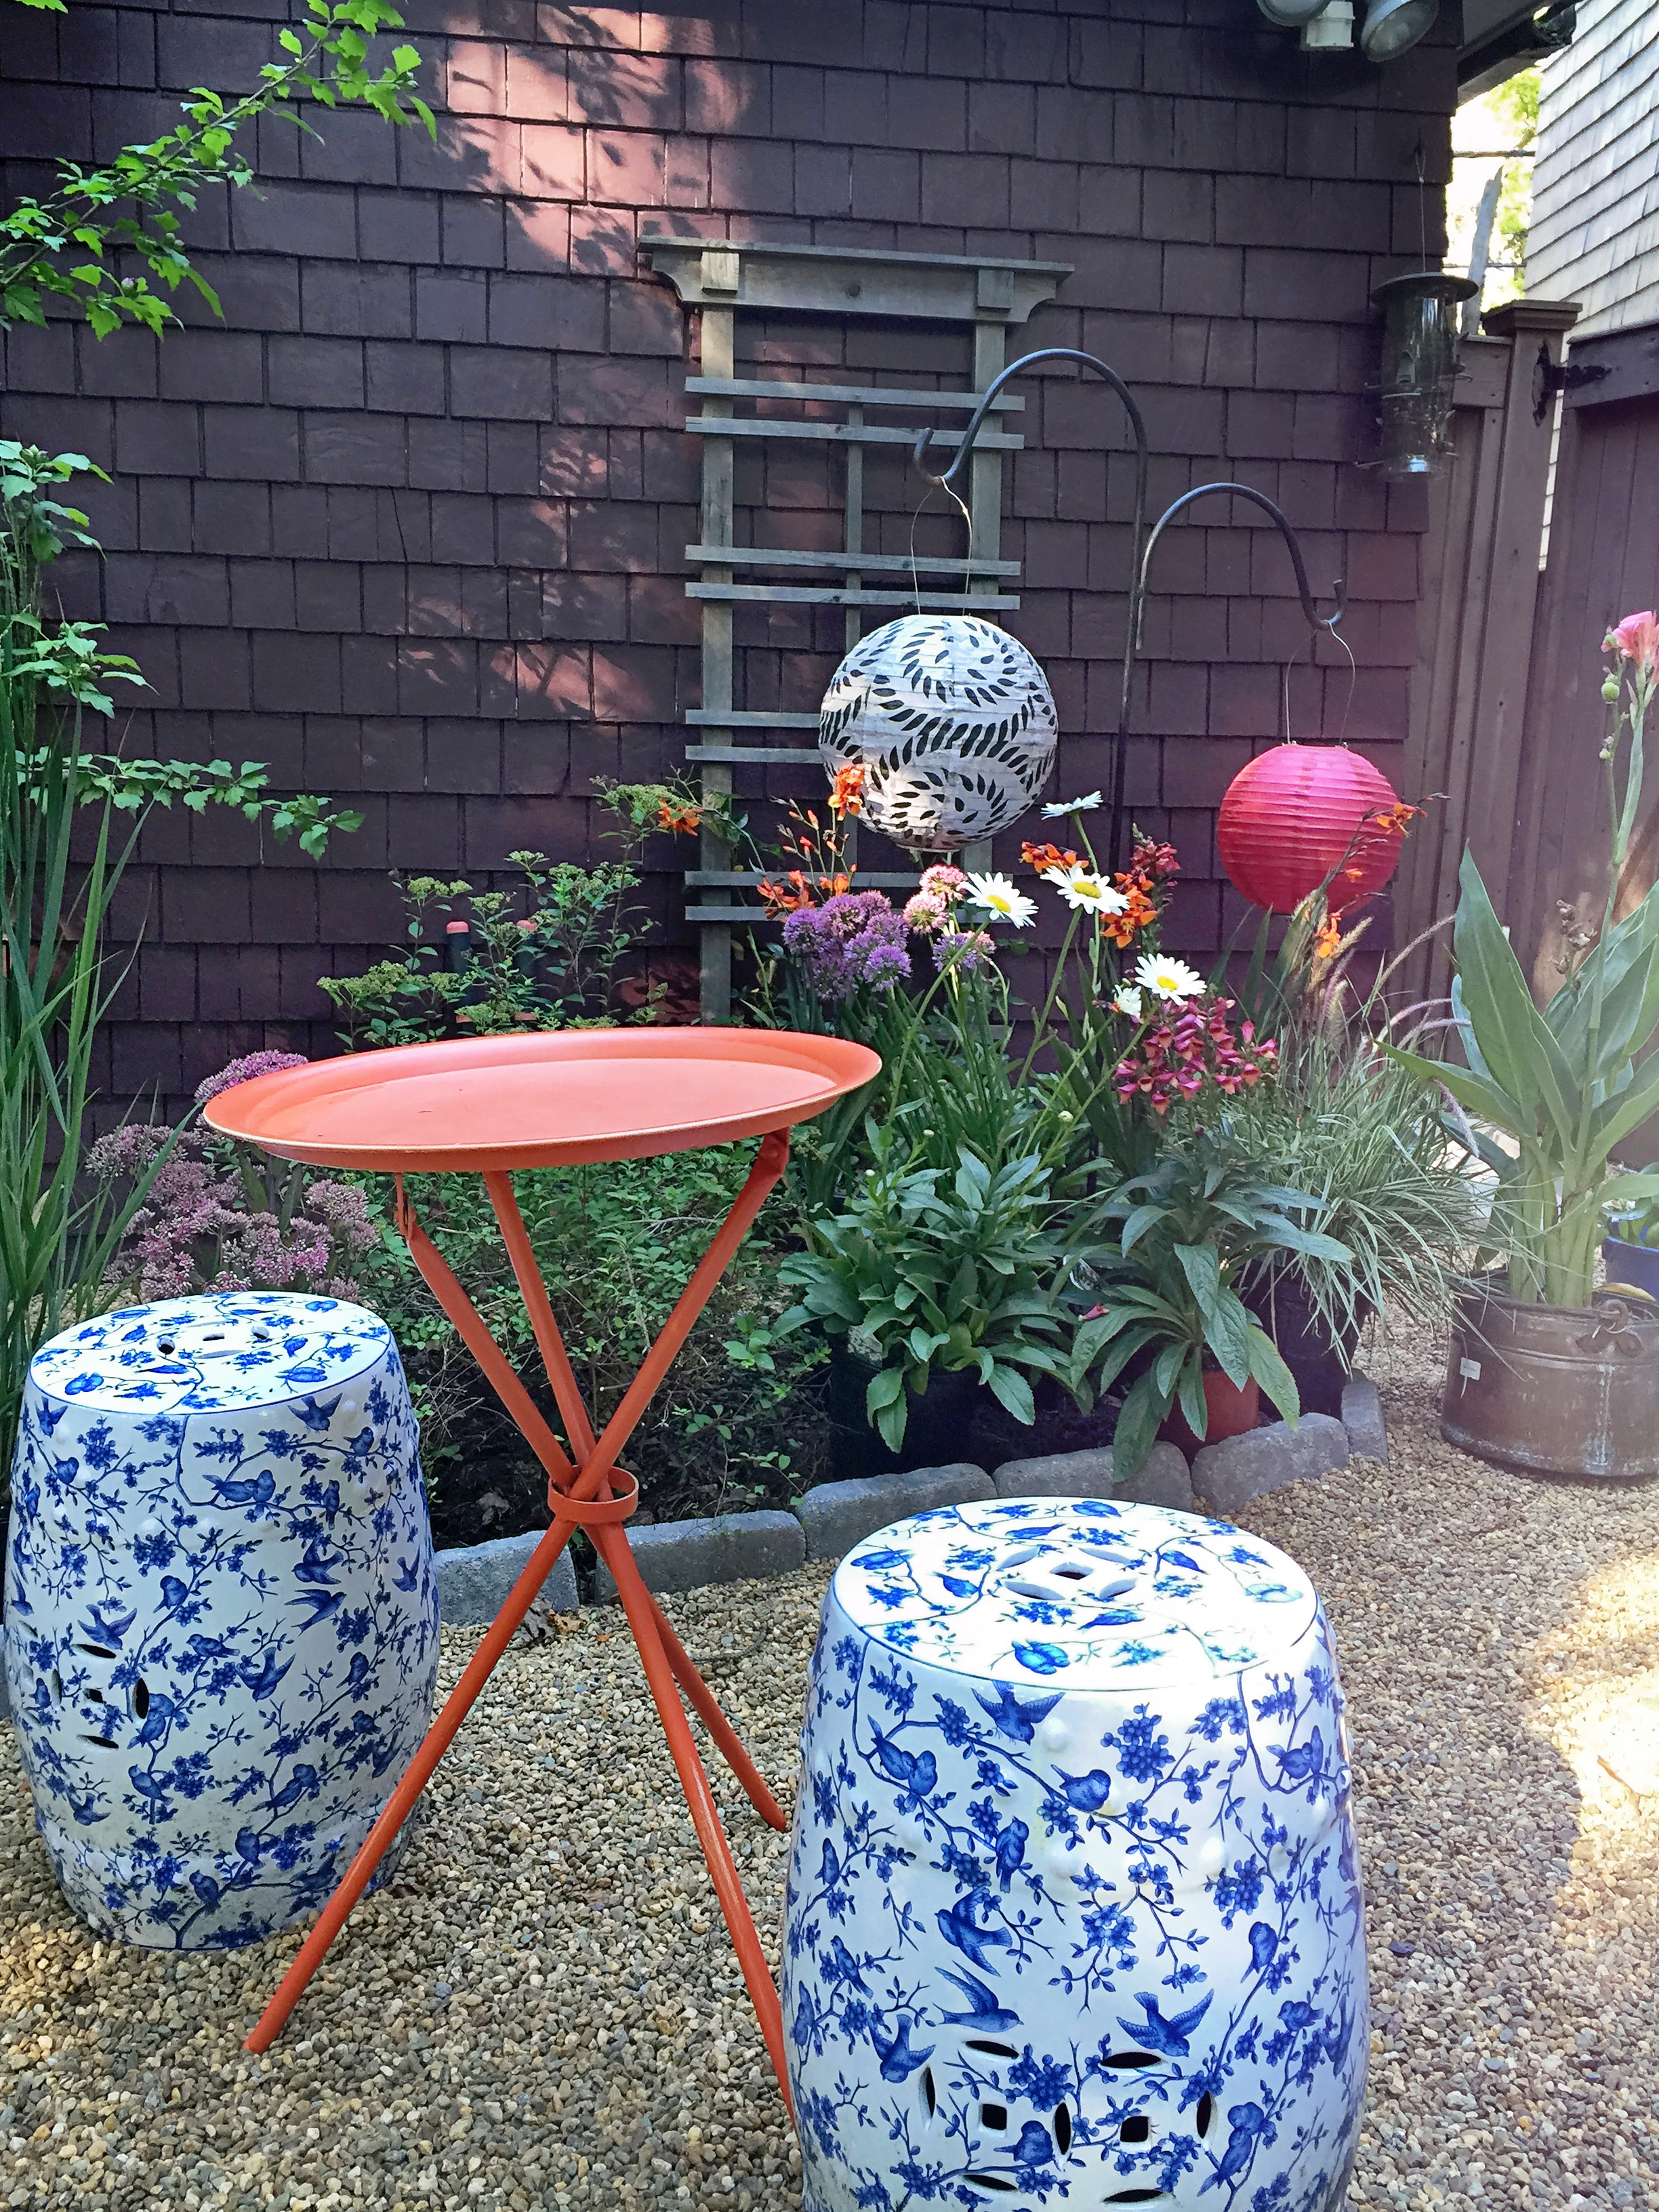 Porcelain garden stools and a little coffee table to enjoy the new space.